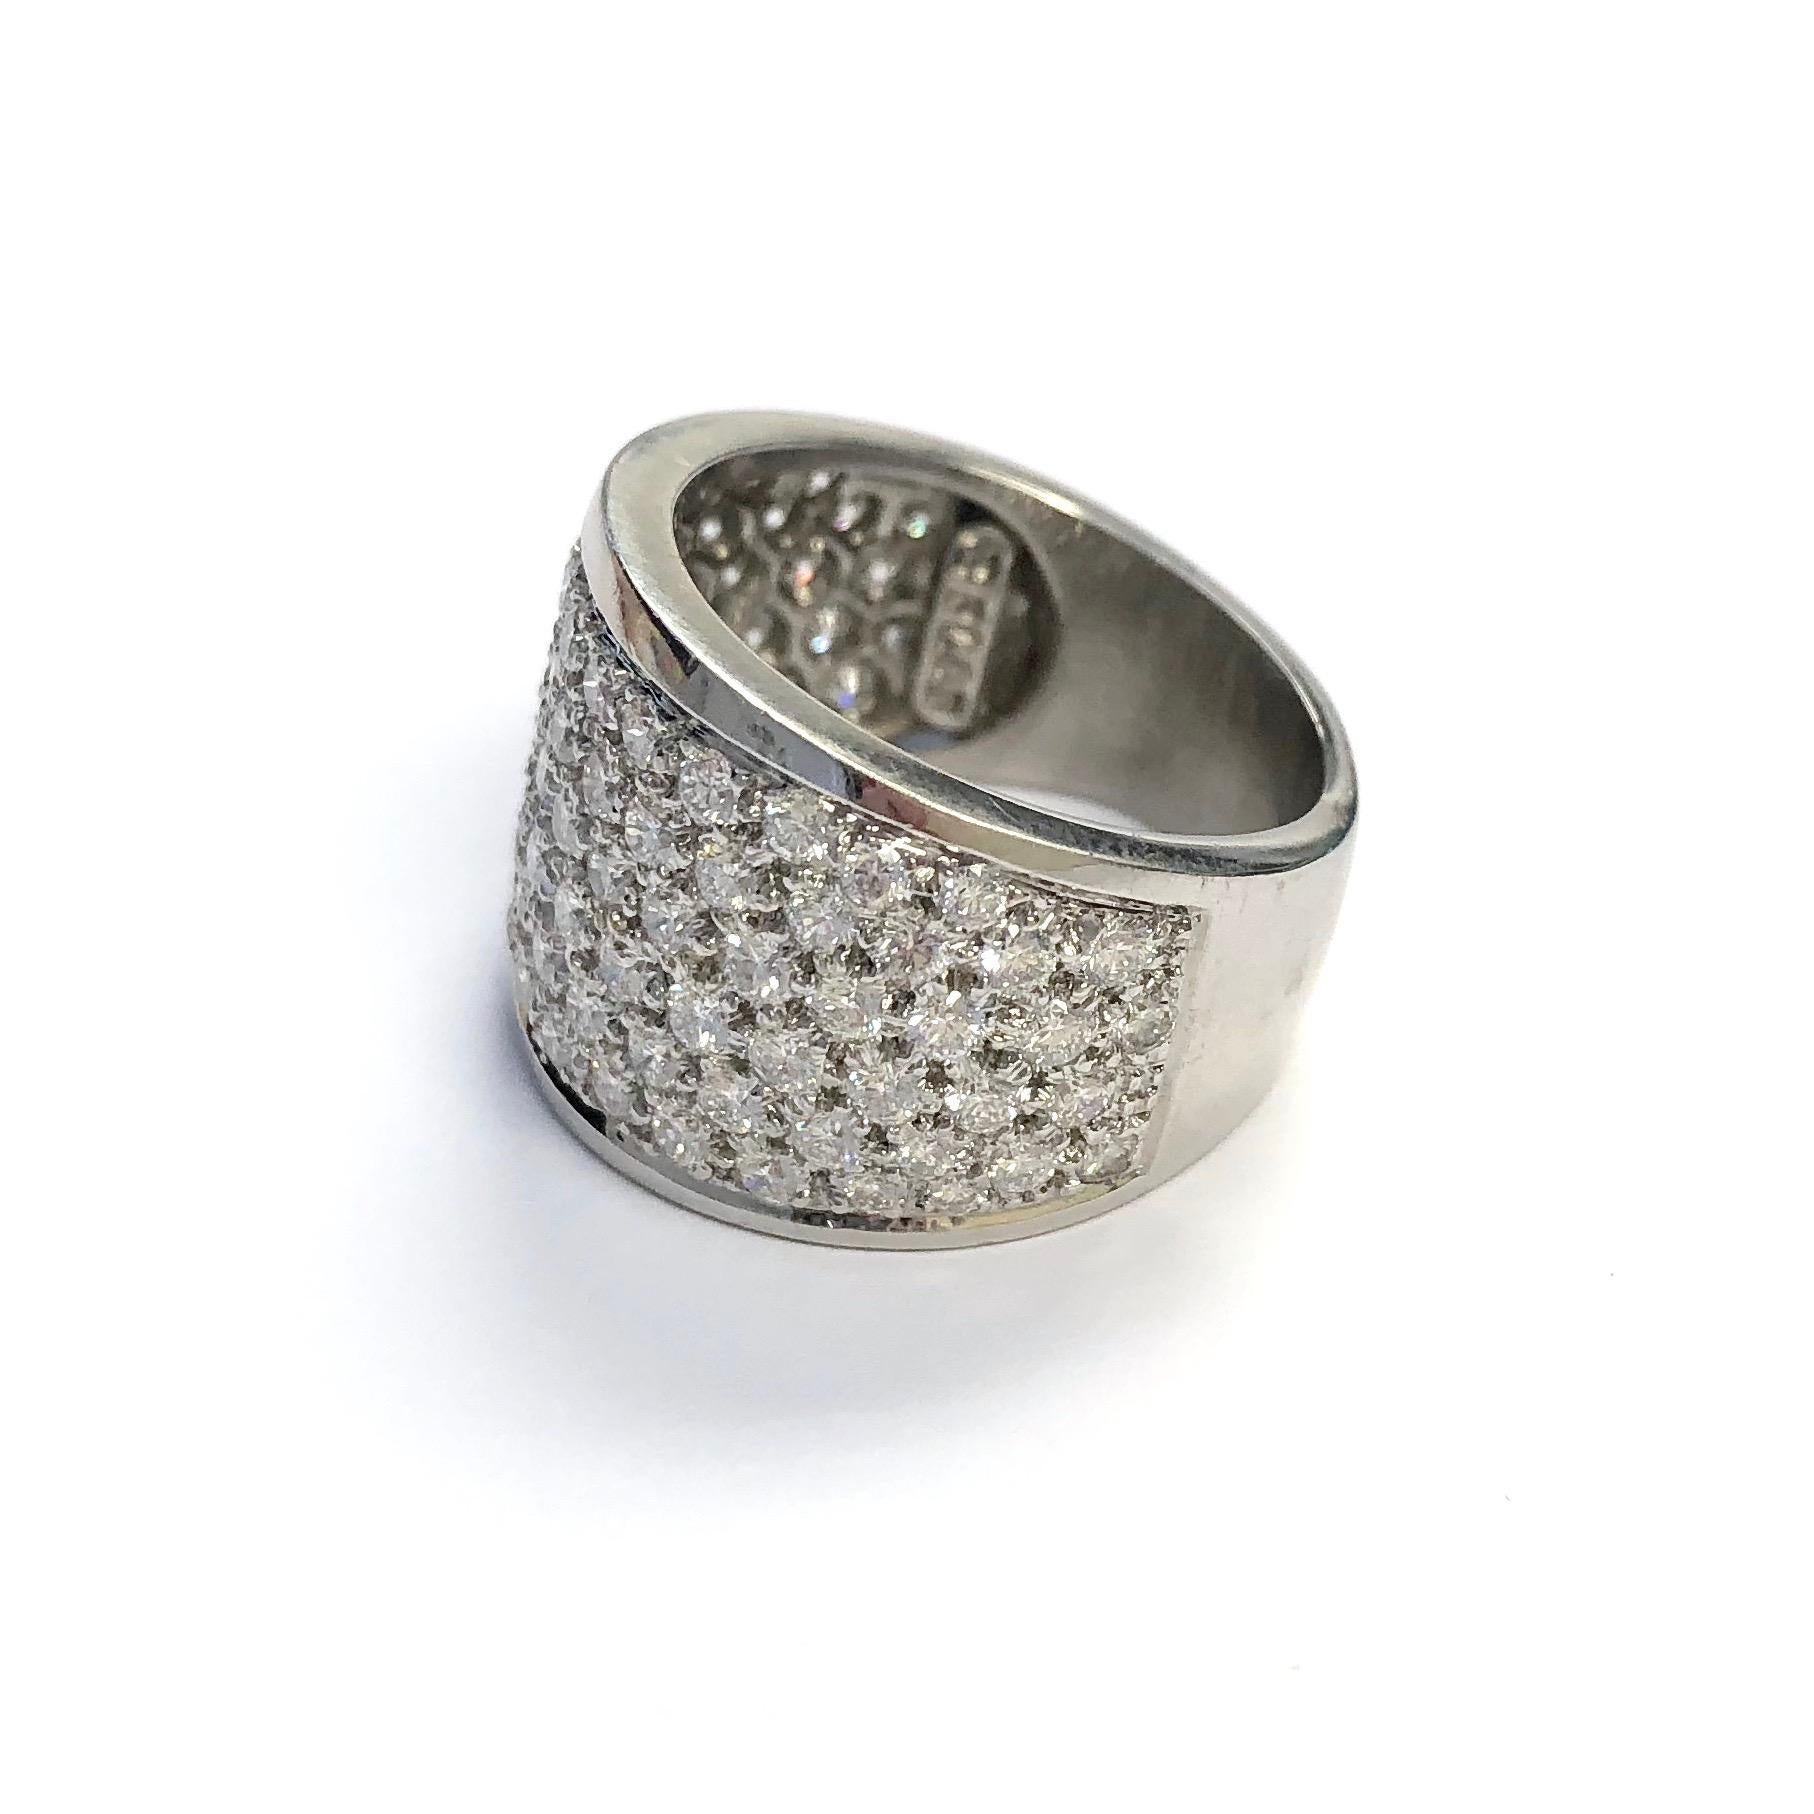 Magnificent platinum diamond band from the famous jewelry house Hammerman Brothers. Featuring six rows of diamonds on the front tapering down to a seven minnimeter band on the back. 100 round brilliant cut diamonds, approximate total weight of